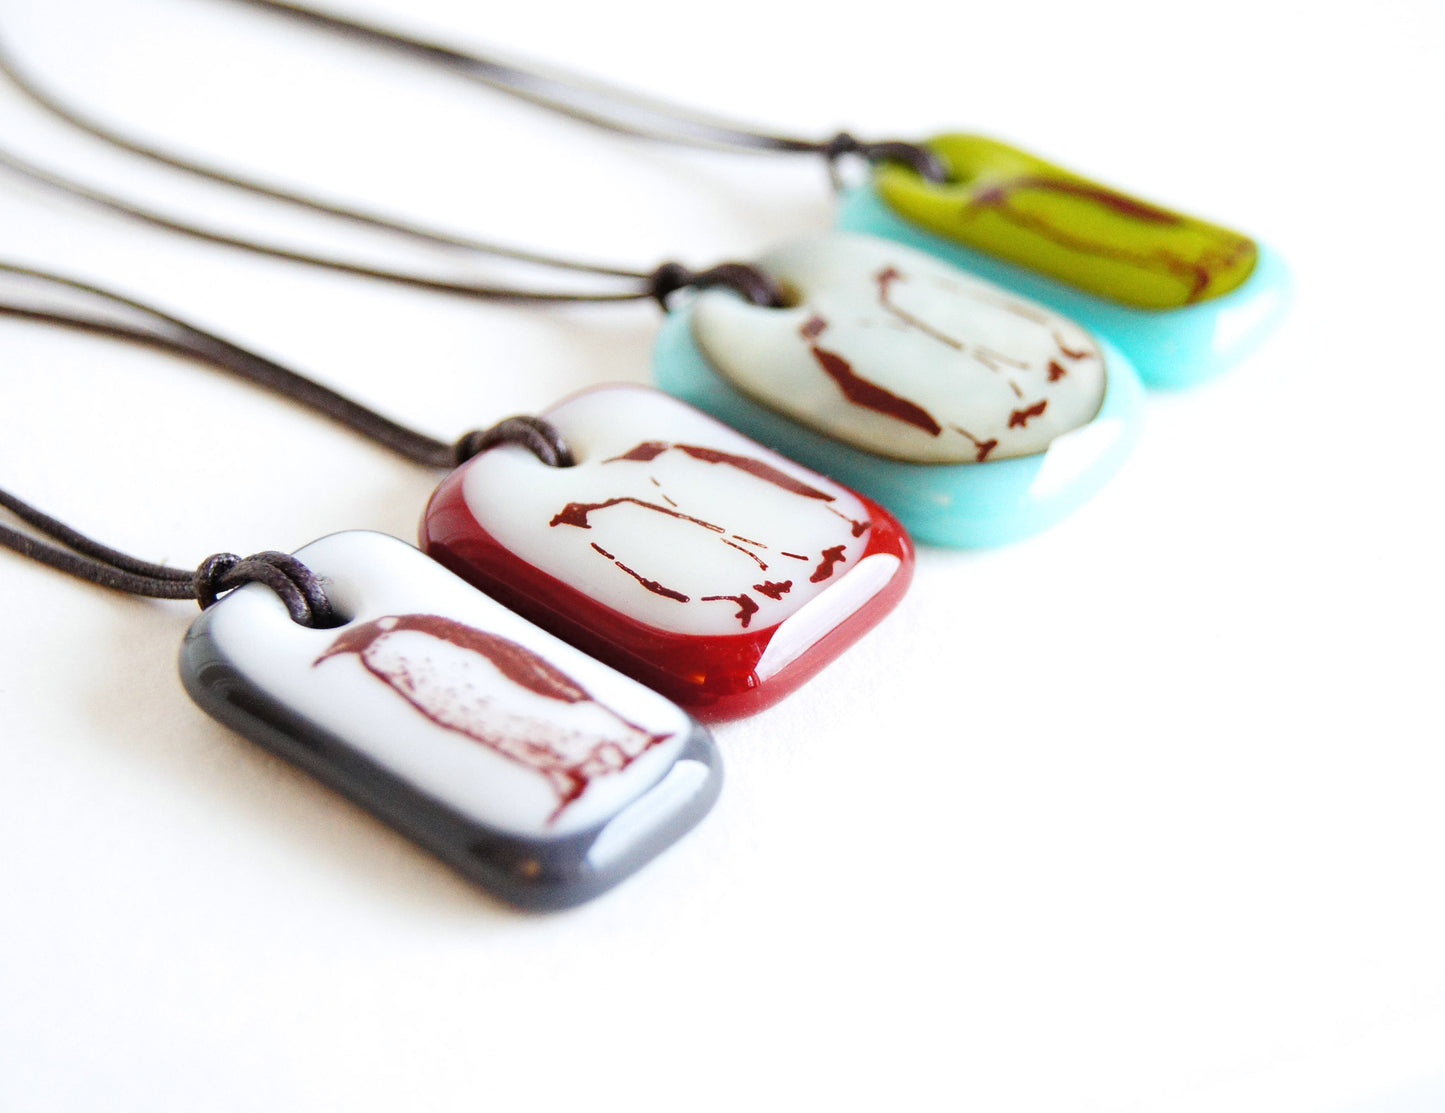 Fun penguin necklaces handmade in colorful glass